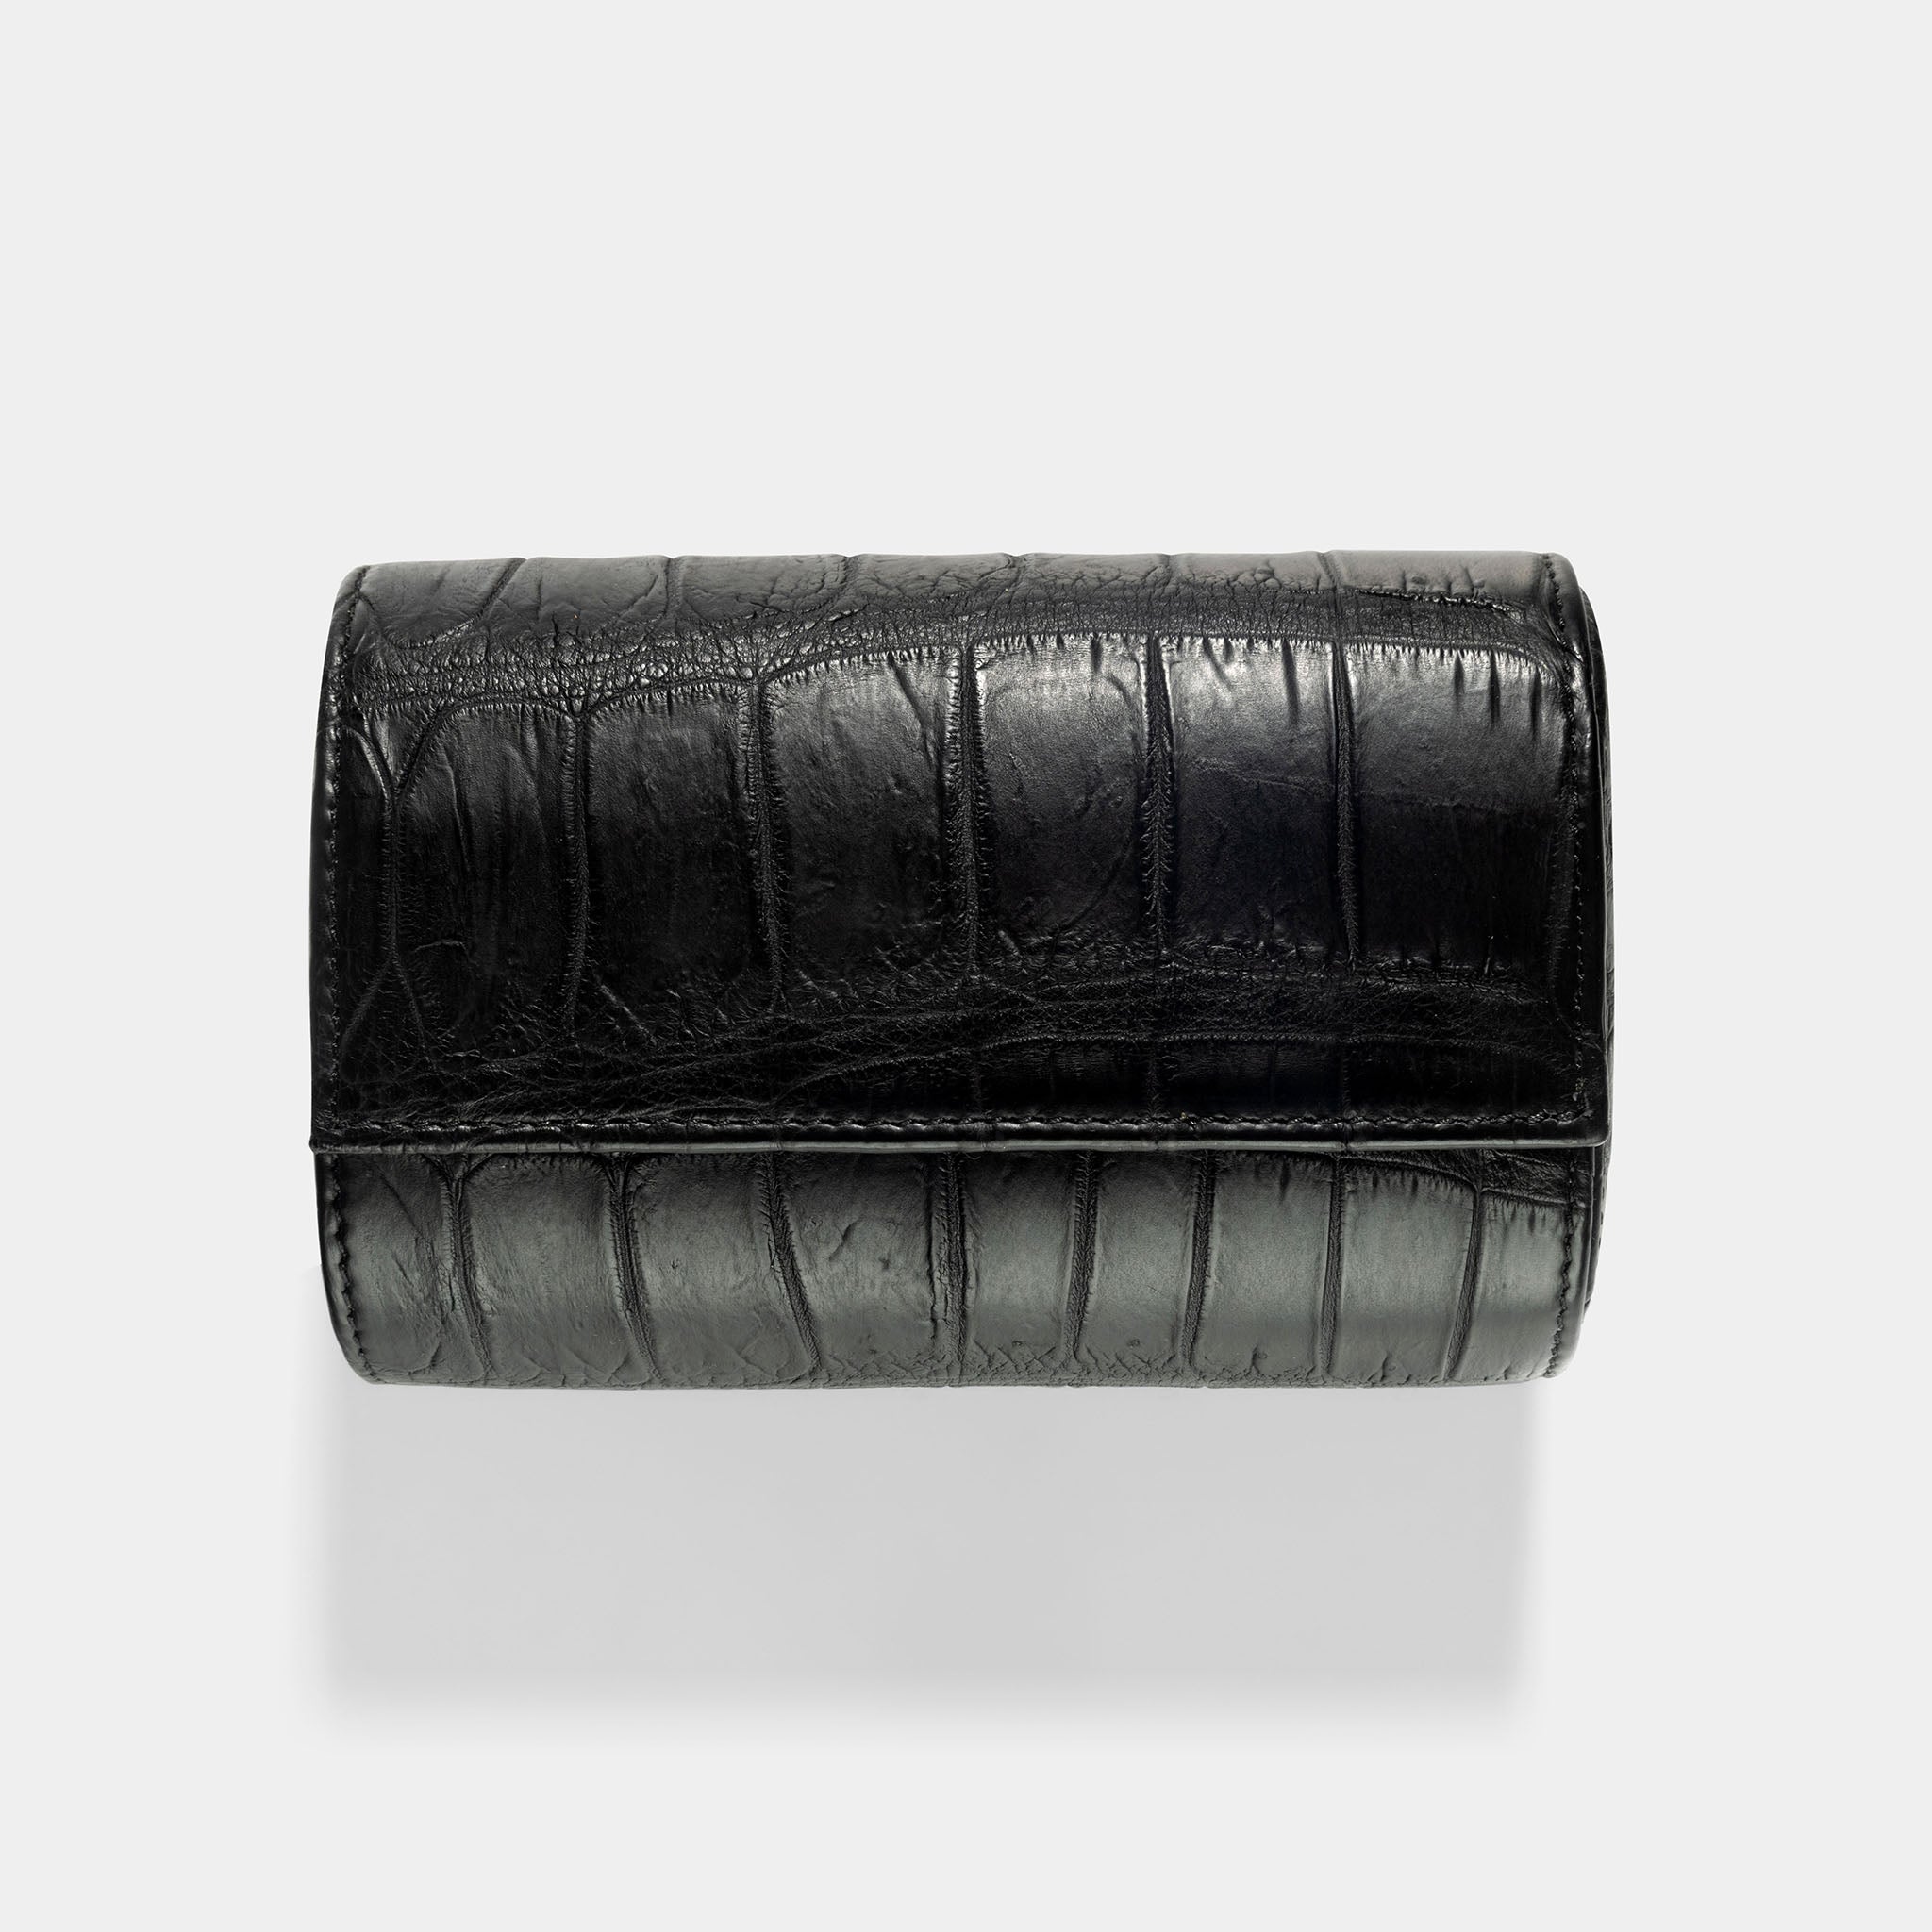 Oval_Finest_Black_Alligator_Leather_Watch_Box_For_Rolex_Watches